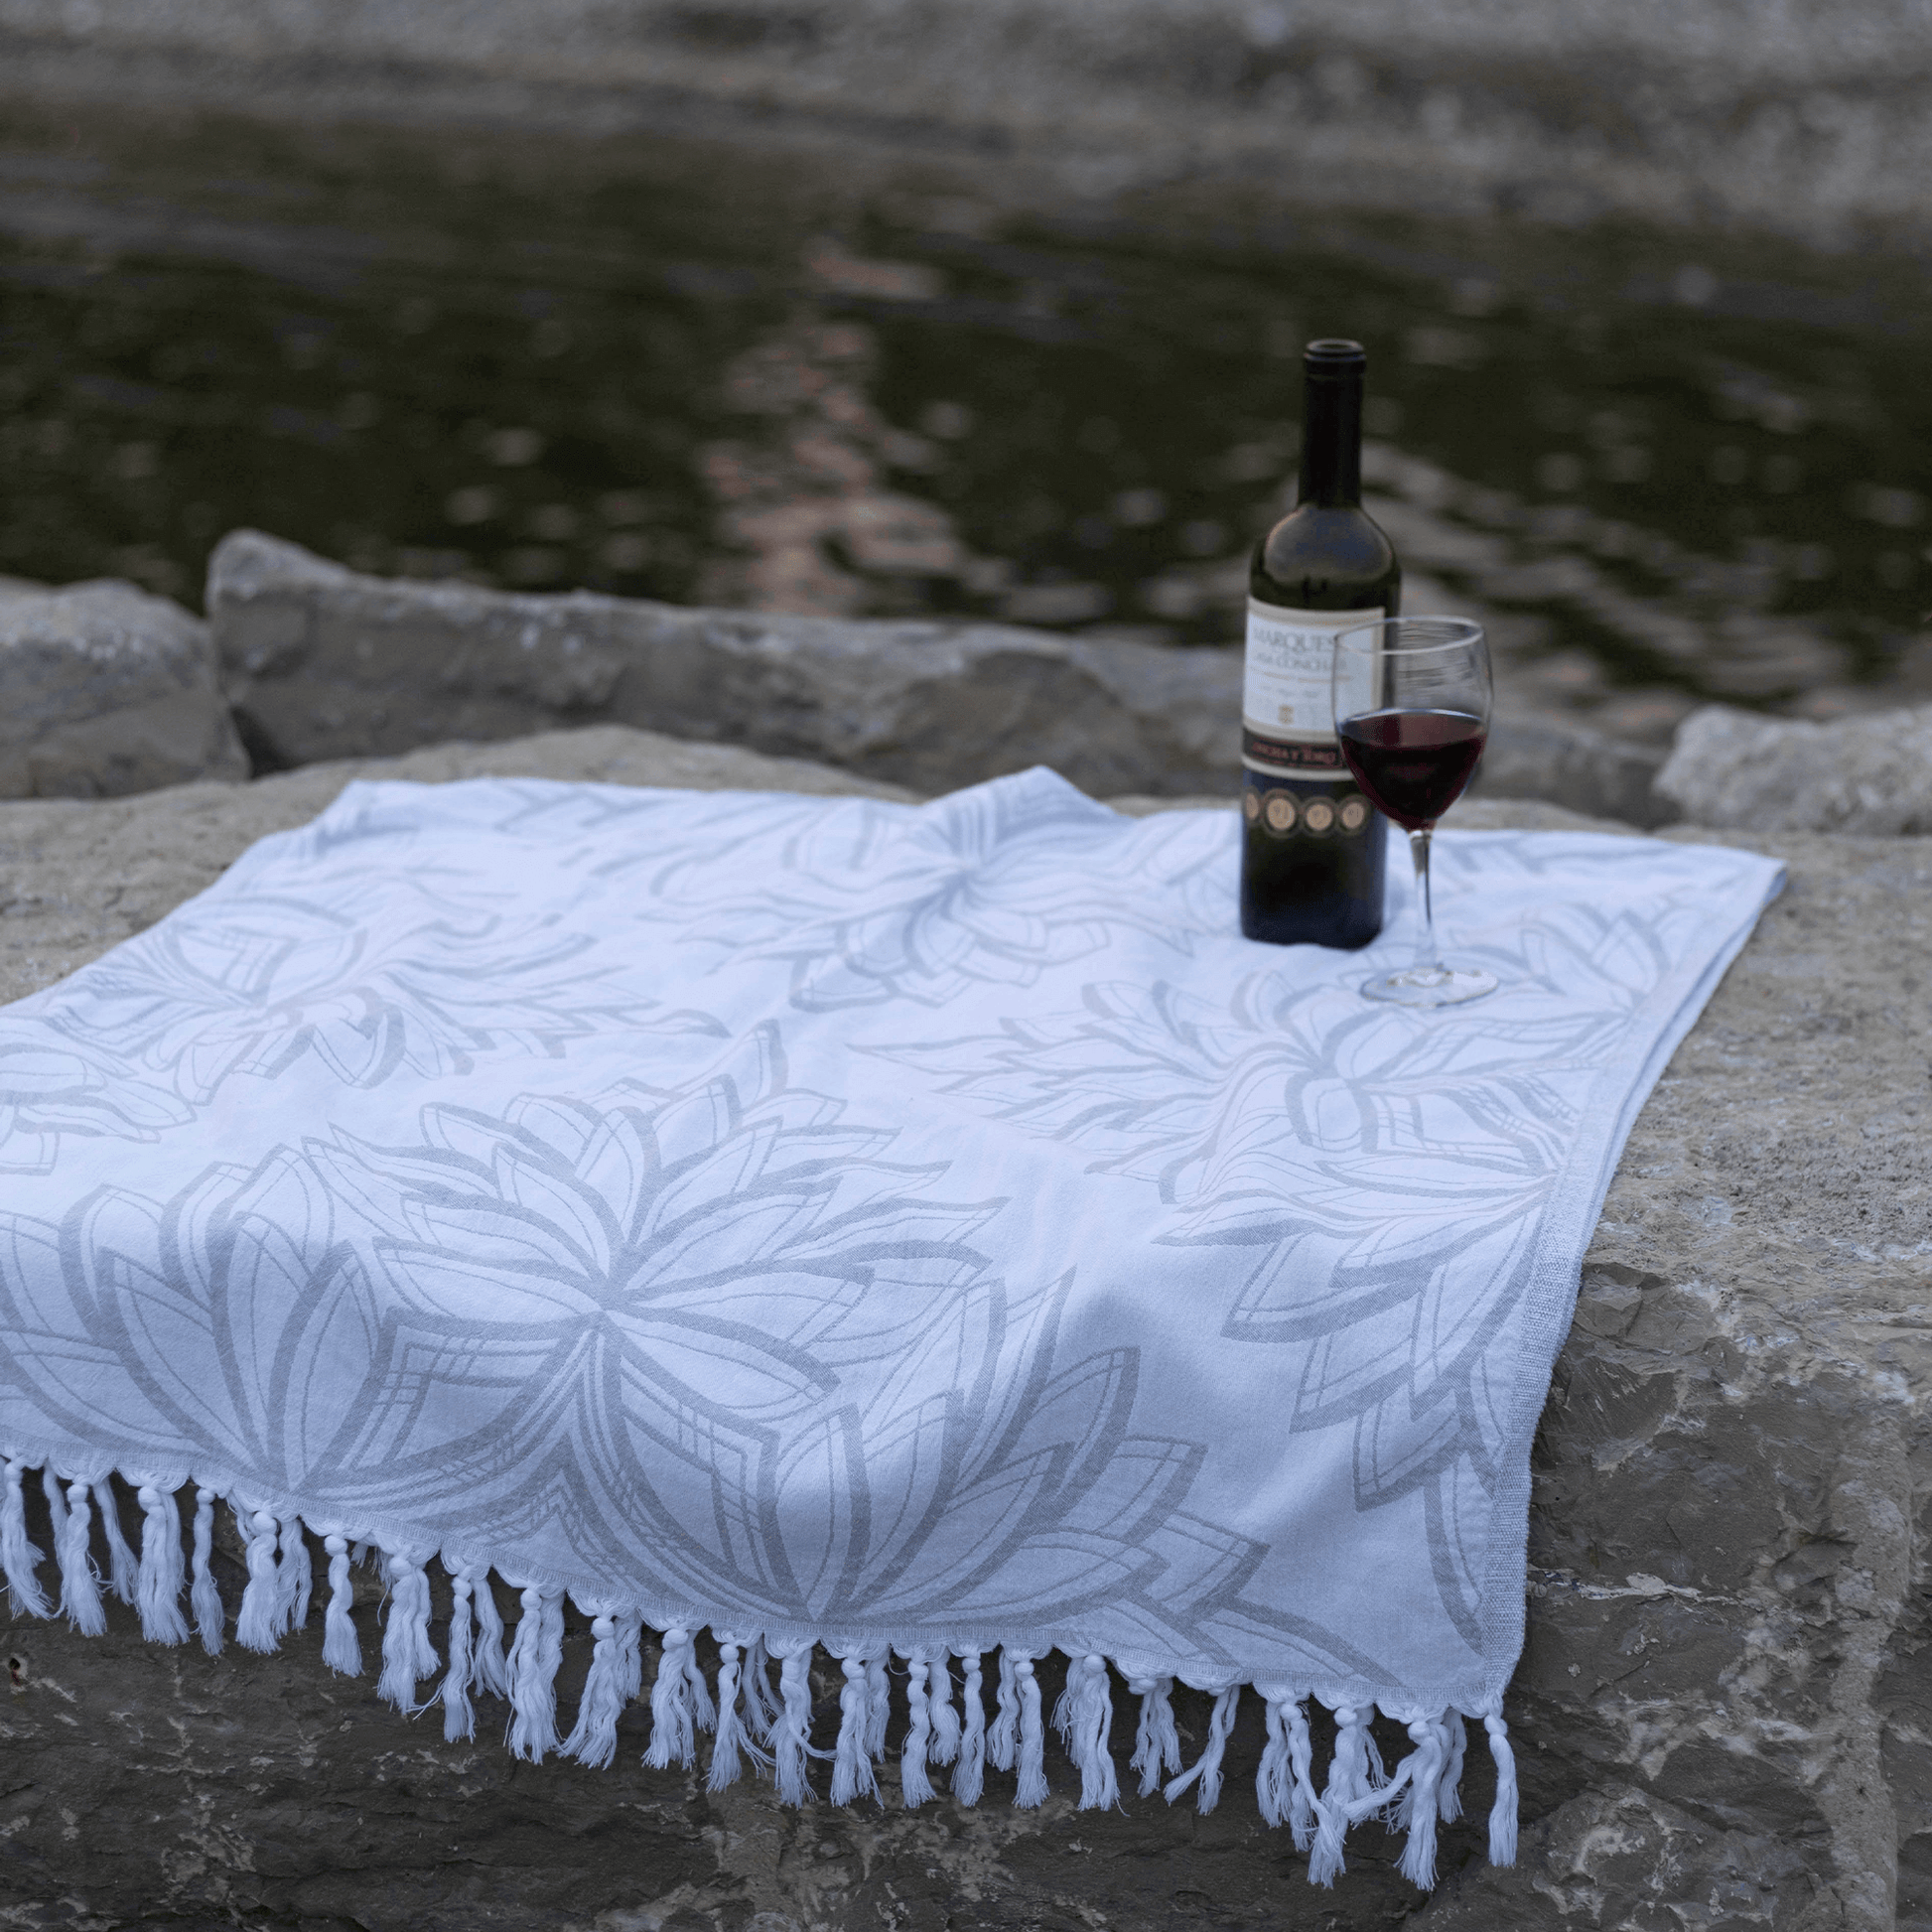 Grey and white Turkish towel on large rocks by a lake with a bottle and glass of red wine